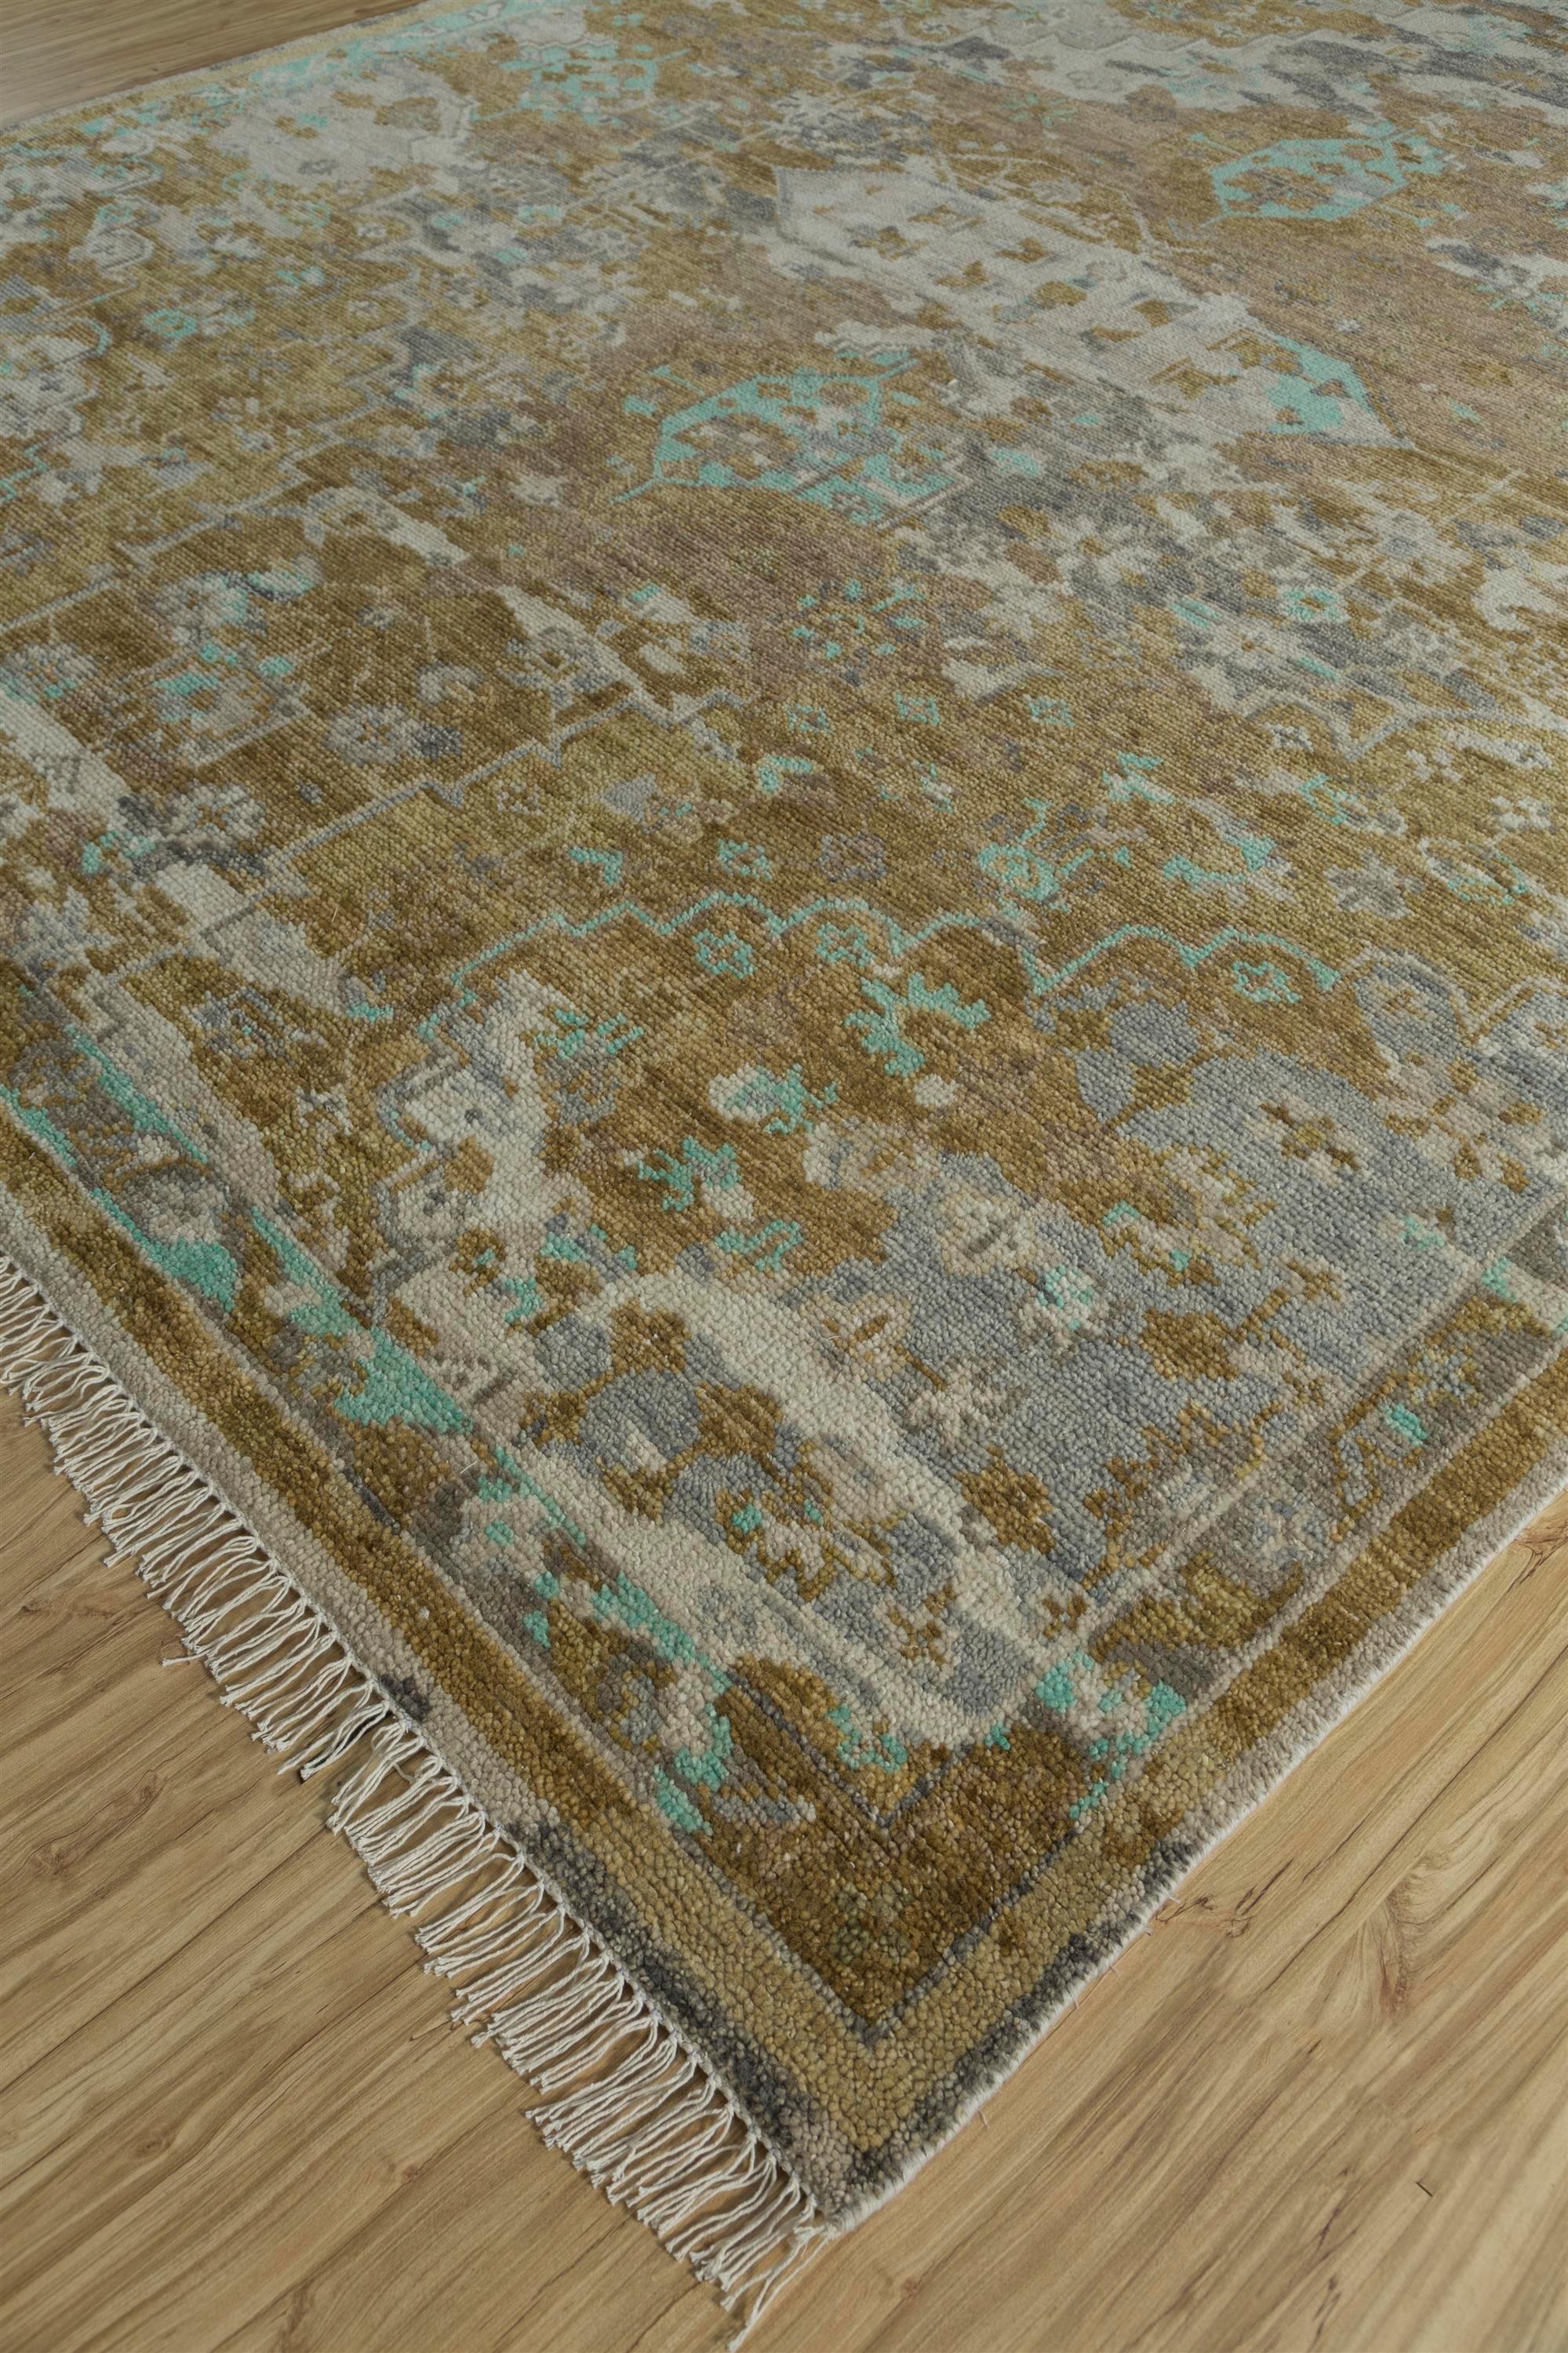 Indian Duskfall Tapestry Dark Ivory & Spice Brown 240x300 cm Handknotted Rug For Sale